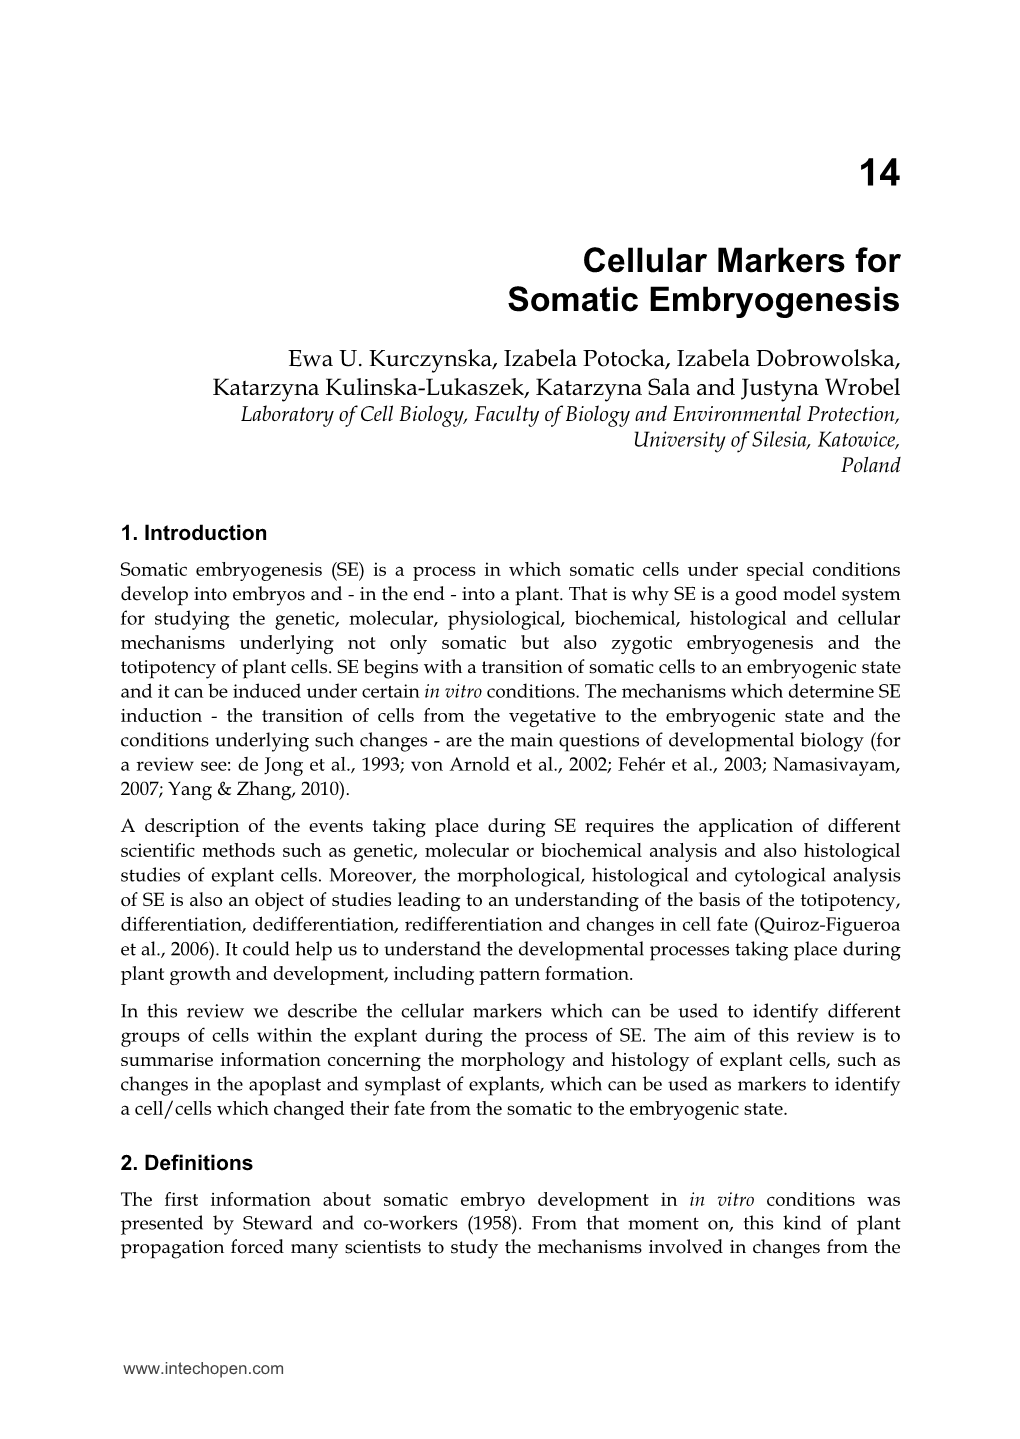 Cellular Markers for Somatic Embryogenesis